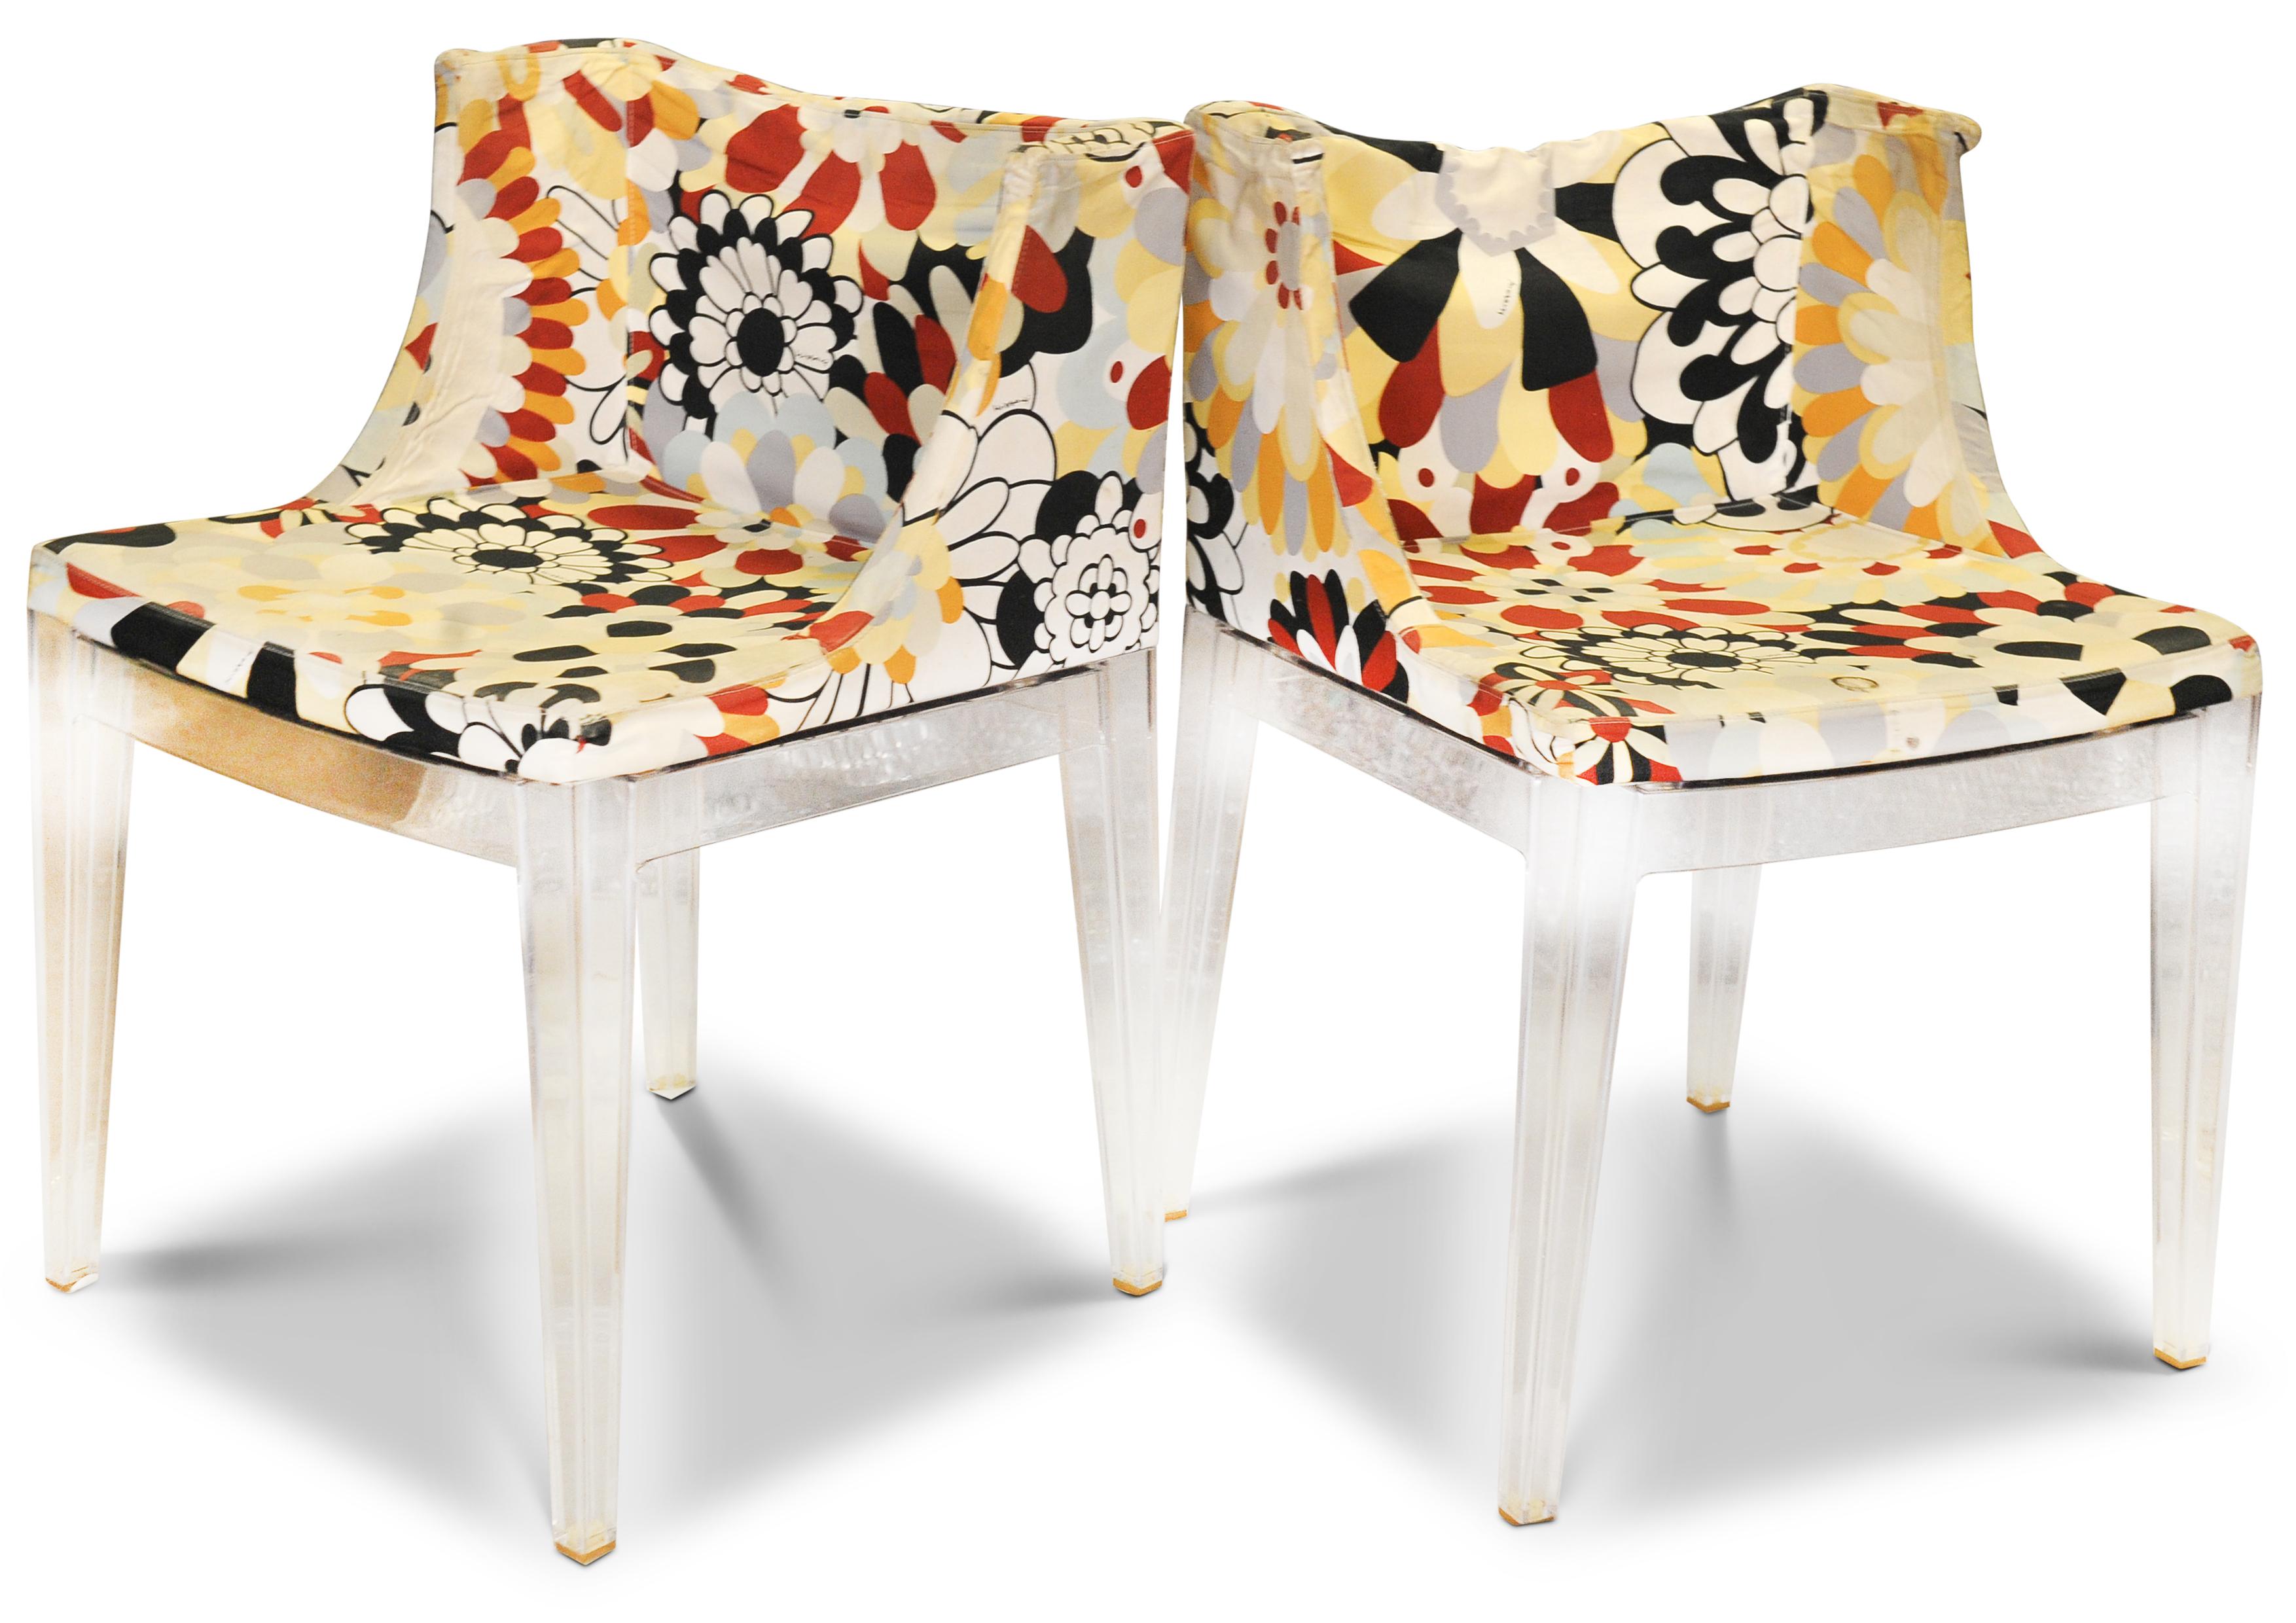 Pair of Philippe Stark for Kartell ‘Mademoiselle’ Lucite Chairs in Missoni Floral Upholstered Fabric With Makers Marks

Made in Italy 

Extra dimensions: Width of seat 41cm I Depth of seat 41cm 

The Mademoiselle armchair is dressed in the wide